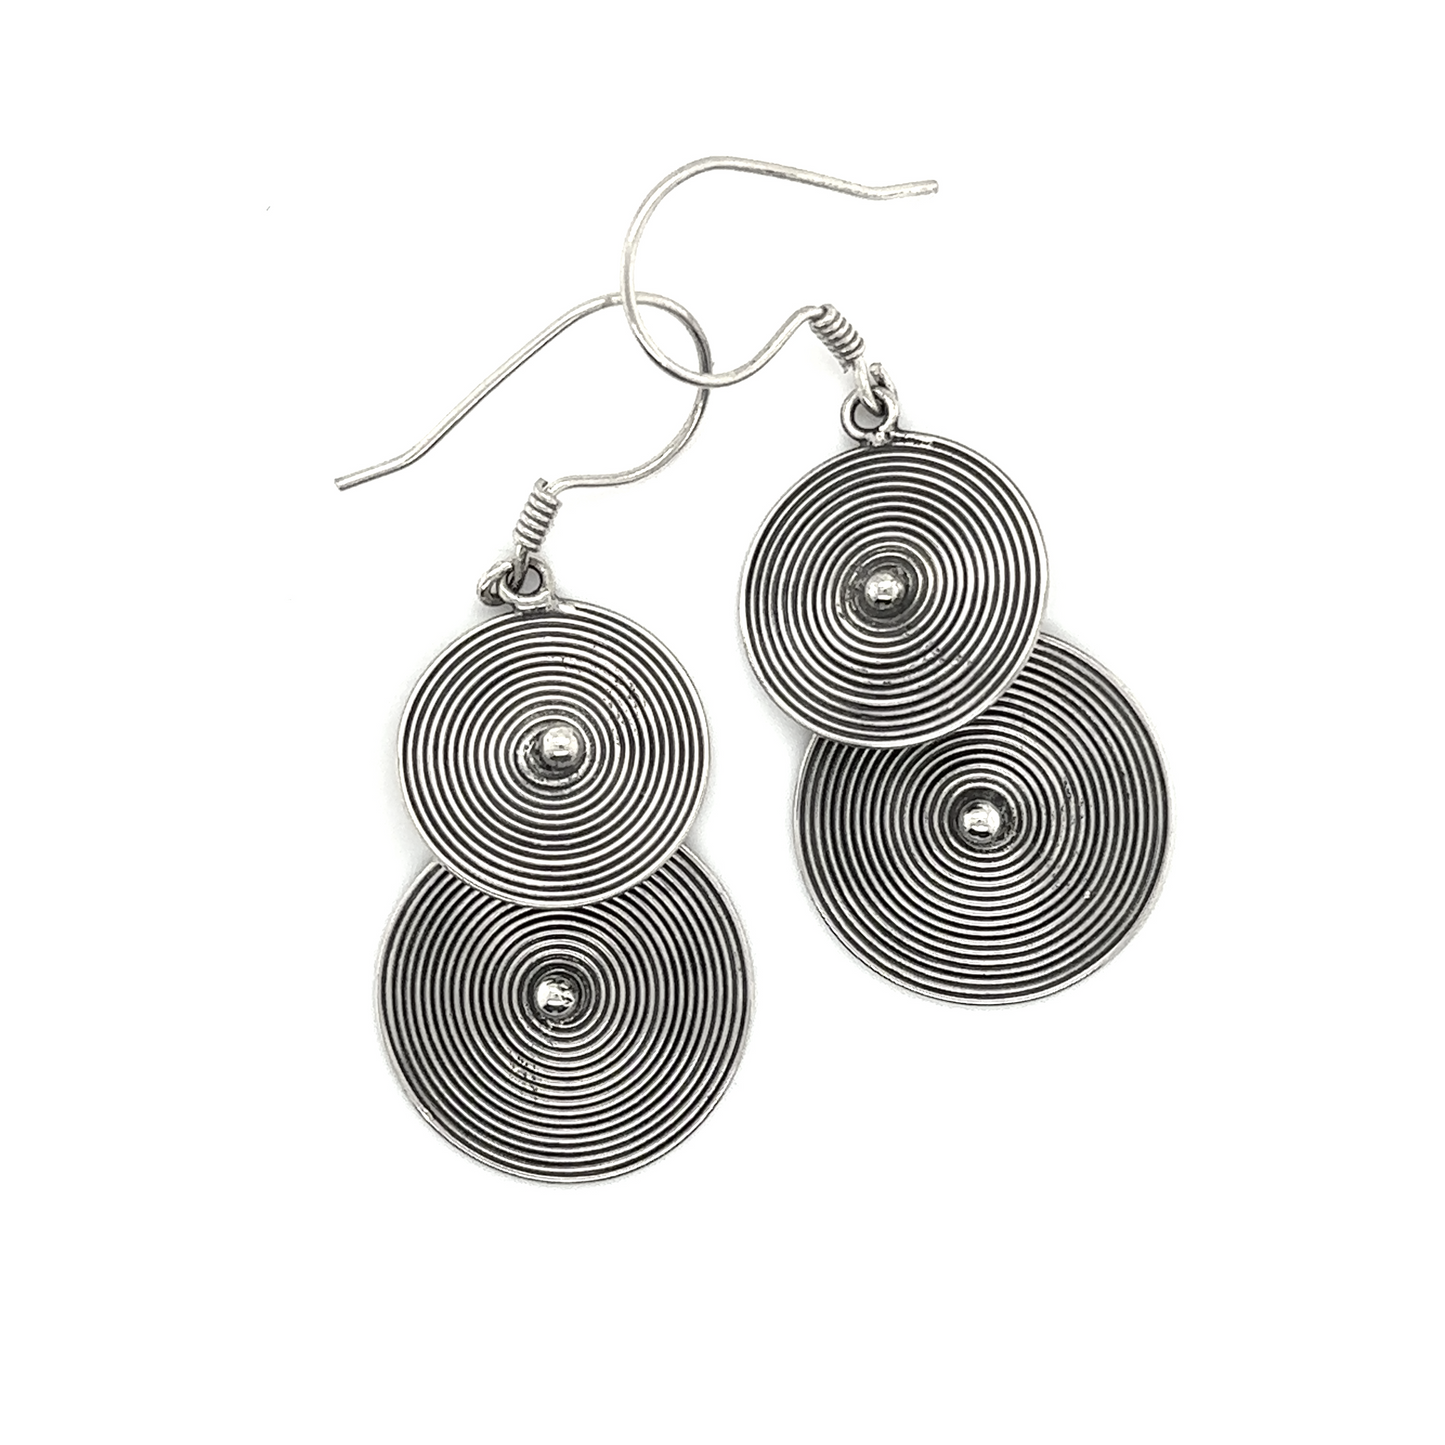 A pair of Super Silver Bali Earrings with Two Spiral Disks with intricate swirls inspired by Bali.